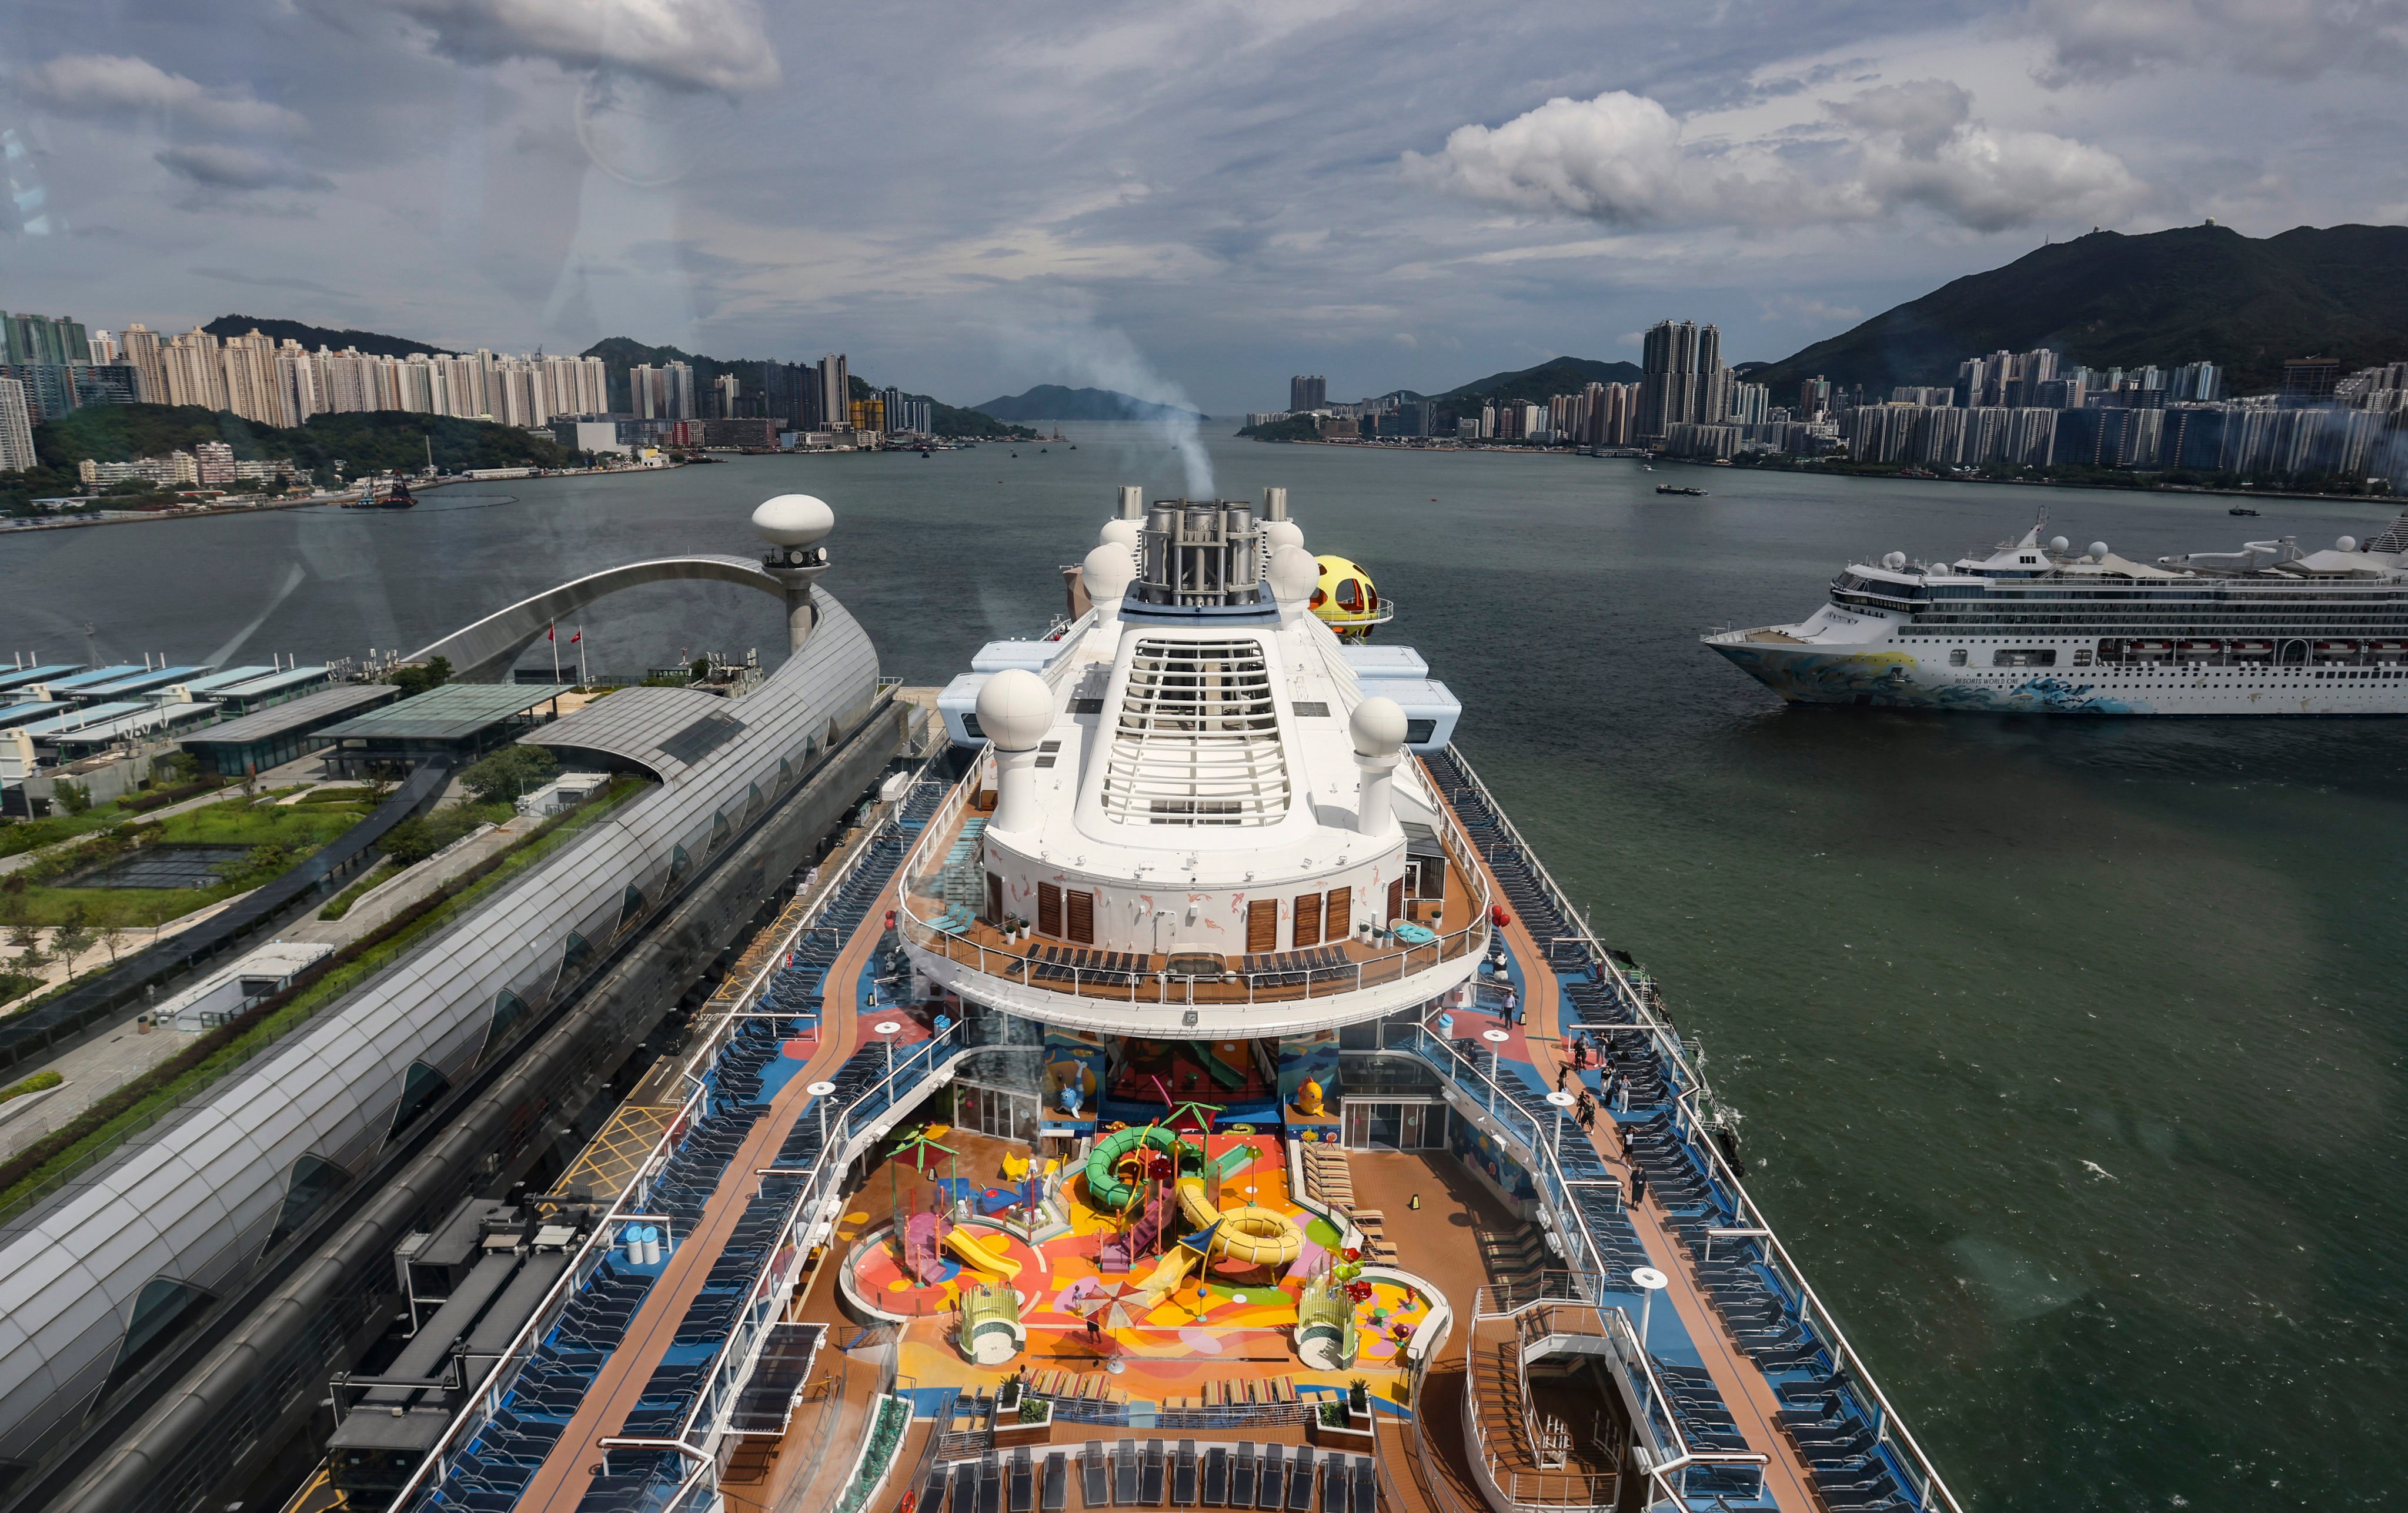 Hong Kong remains an important port due to its international hub status and its accessibility, according to the company’s senior vice-president and chairman for Asia. Photo: Jonathan Wong